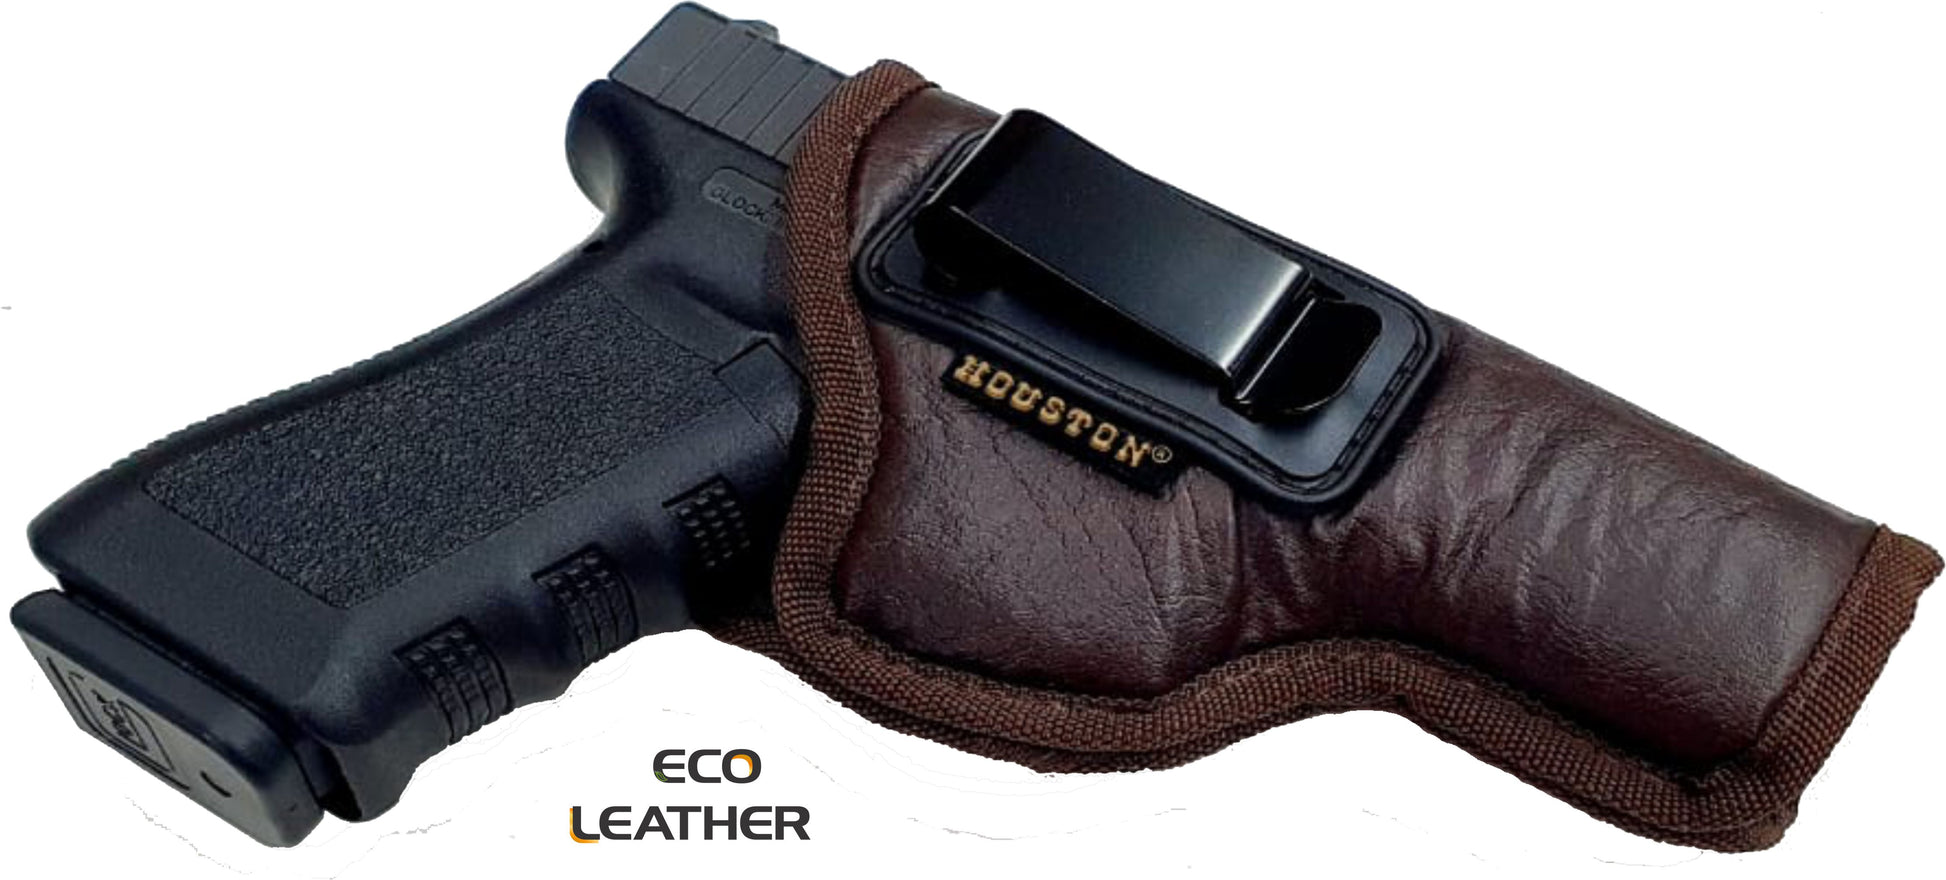 Houston Gun Holsters IWB S333 Thunderstruck Holster - Revolver 22 Wmr by Eco Leather Concealed Carry Soft Material | Suede Interior for Protection